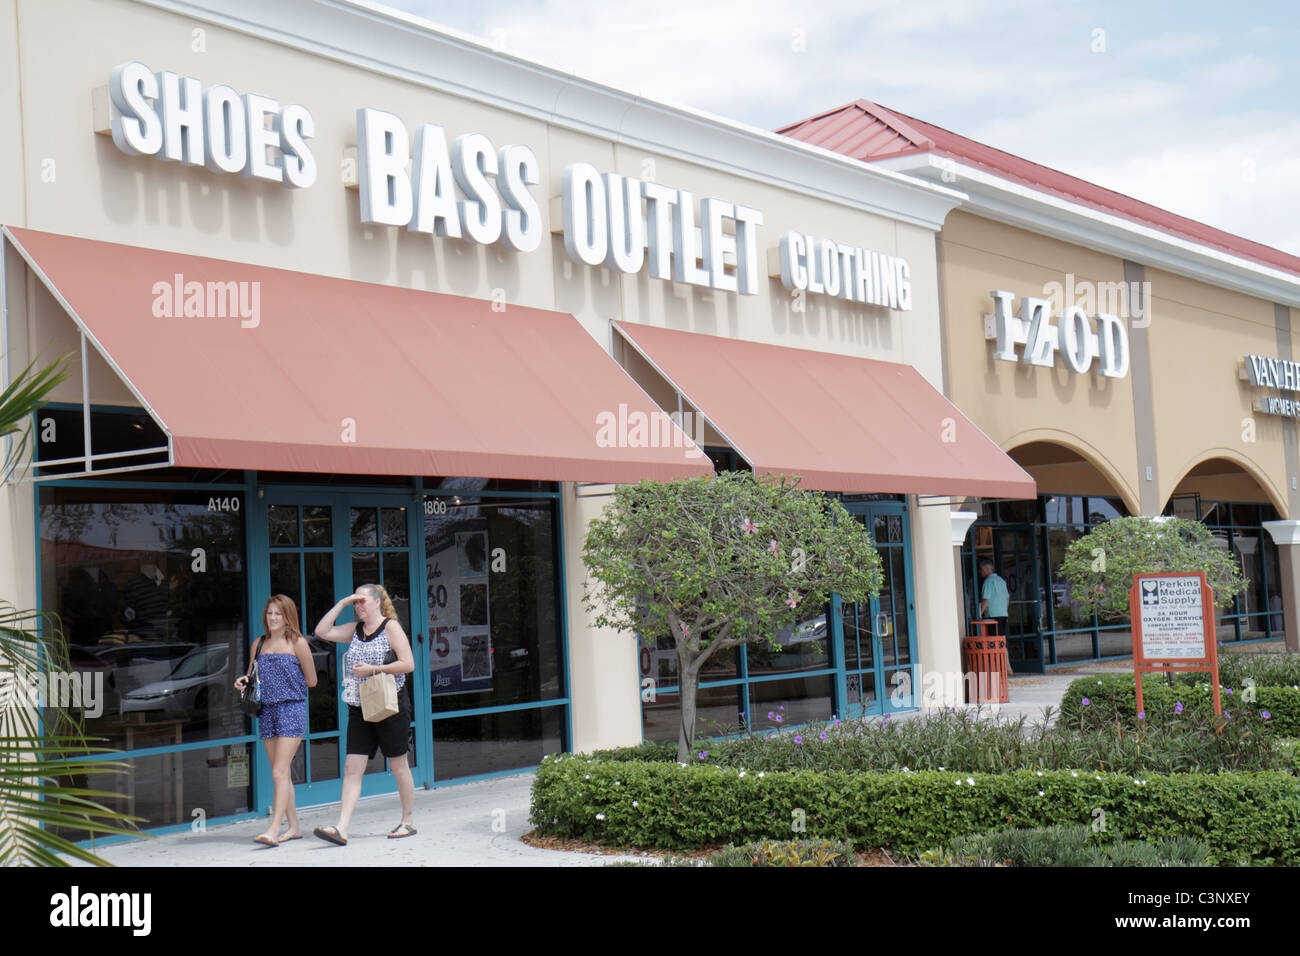 bass outlet near me